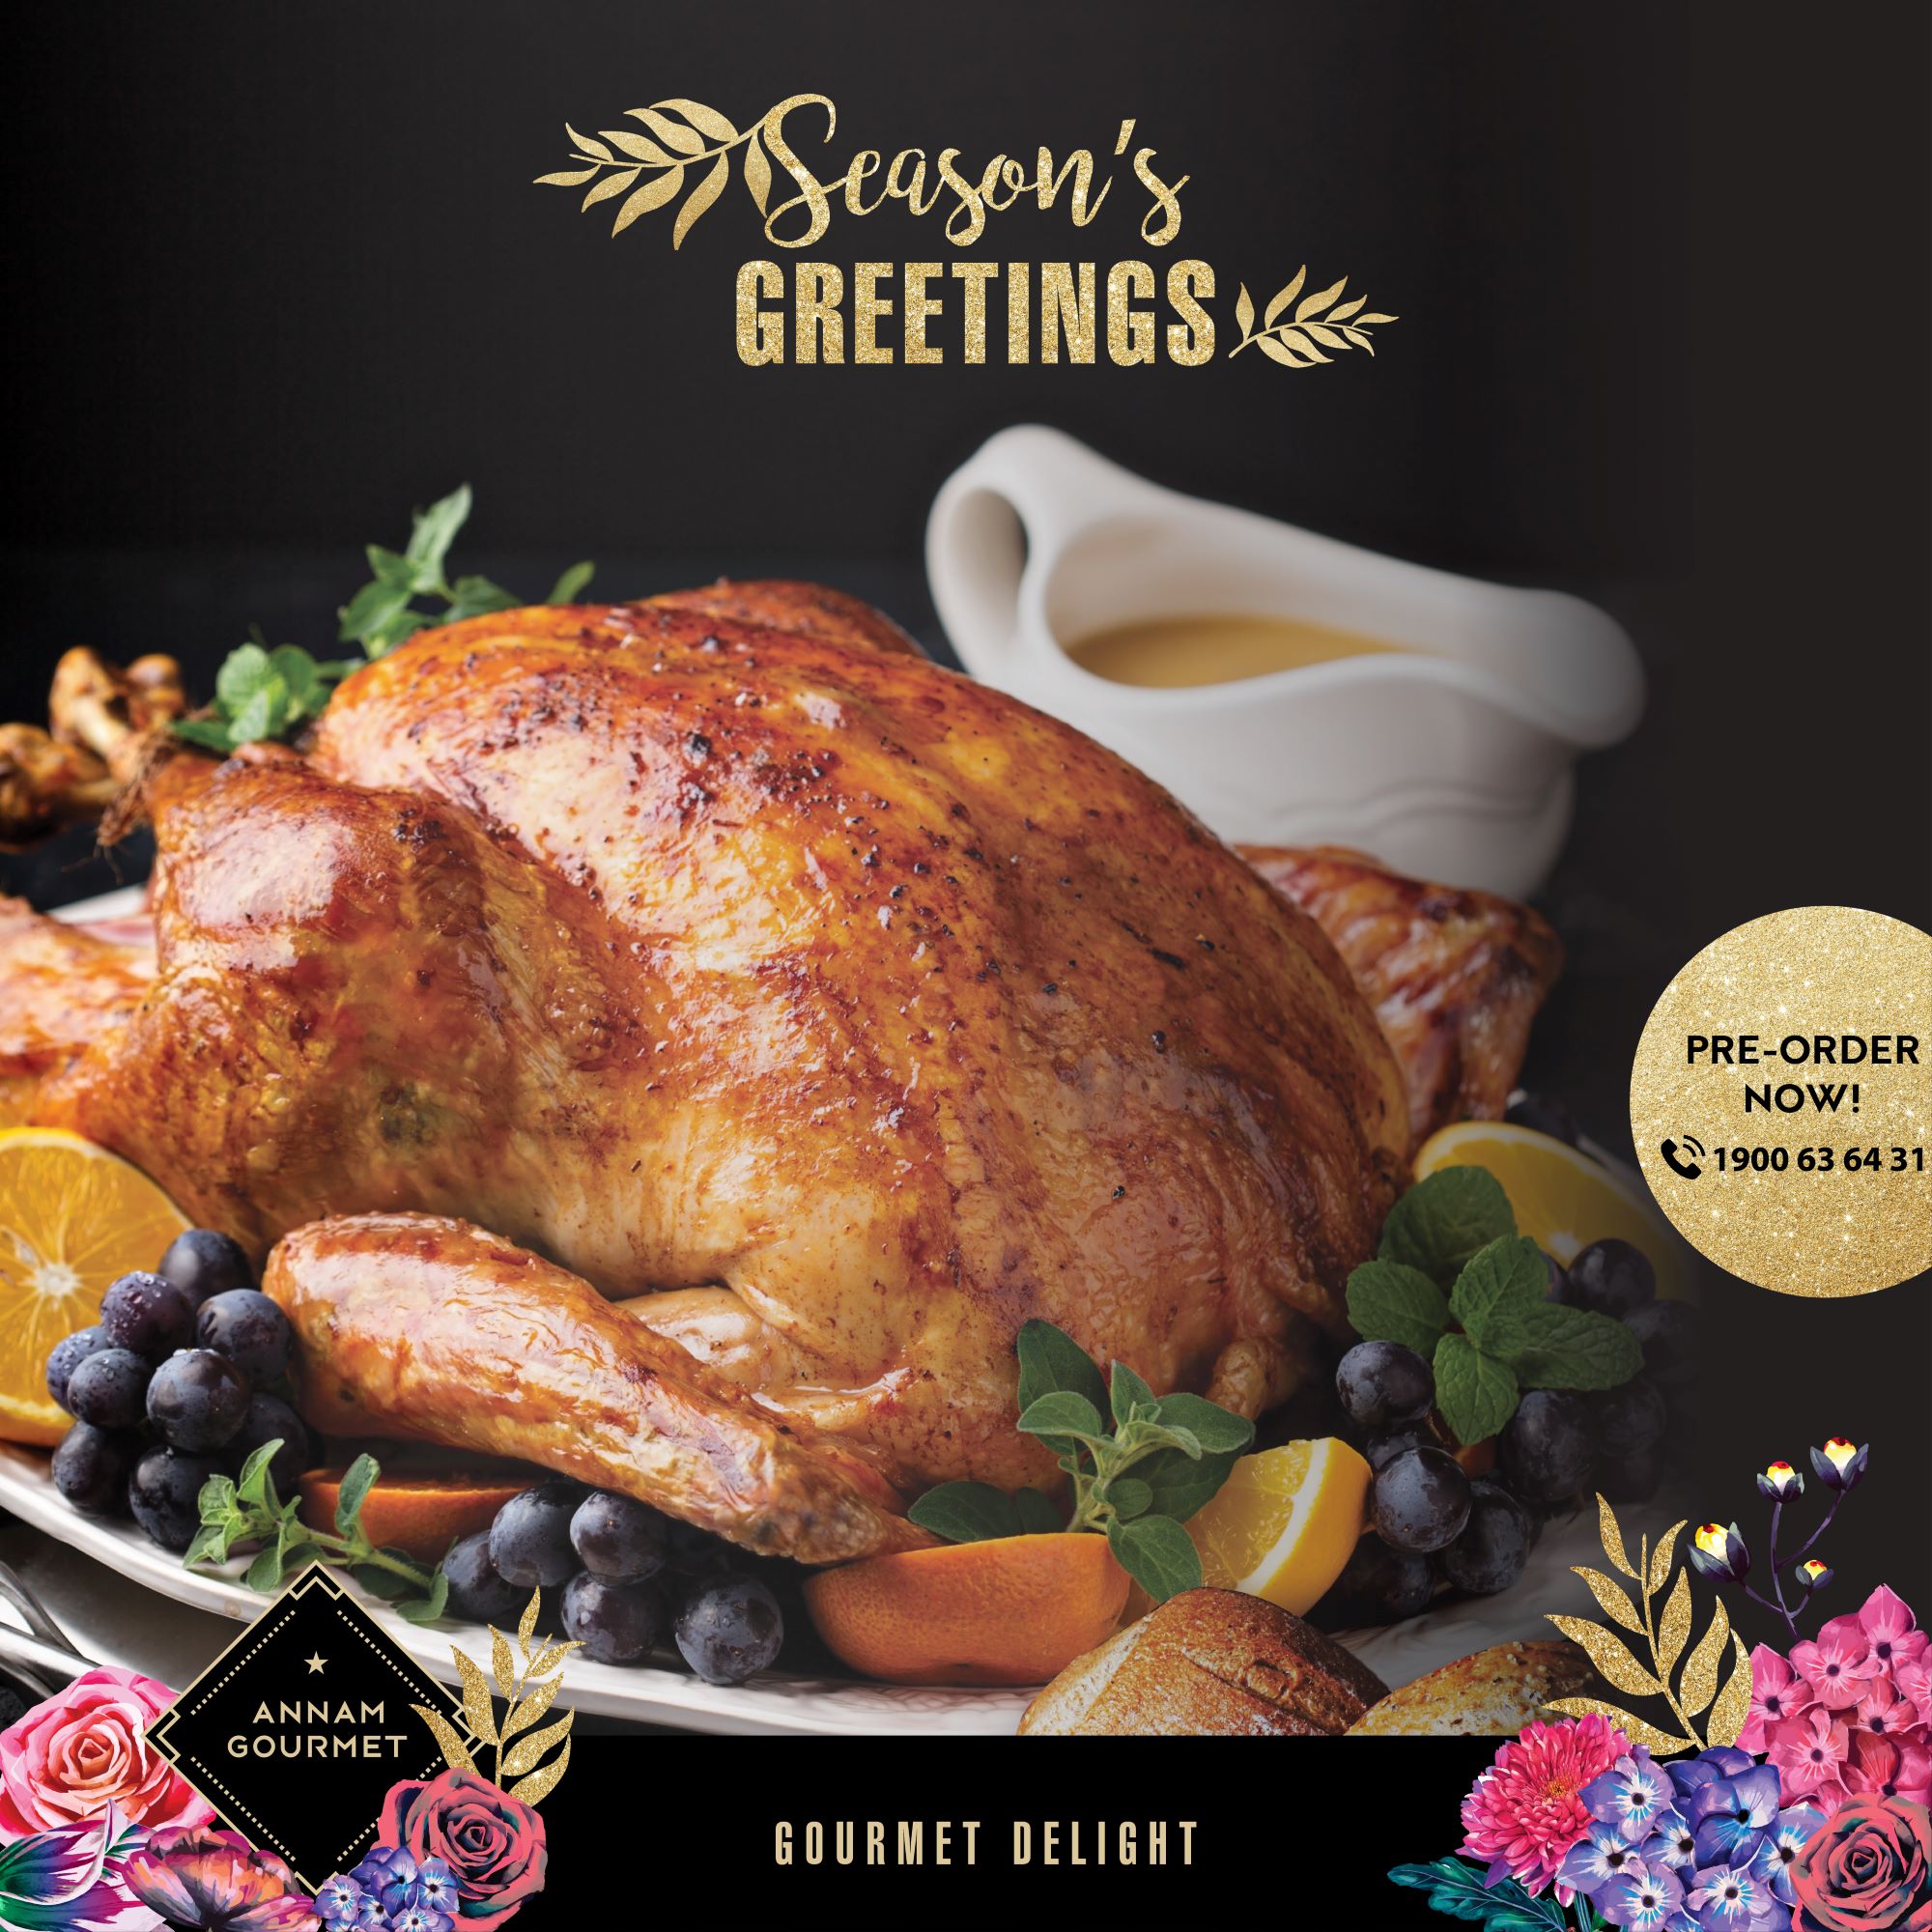 COZY HOLIDAY DINNER WITH STUFFED ROAST TURKEY WITH CHESTNUT SAUCE FROM ANNAM GOURMET!